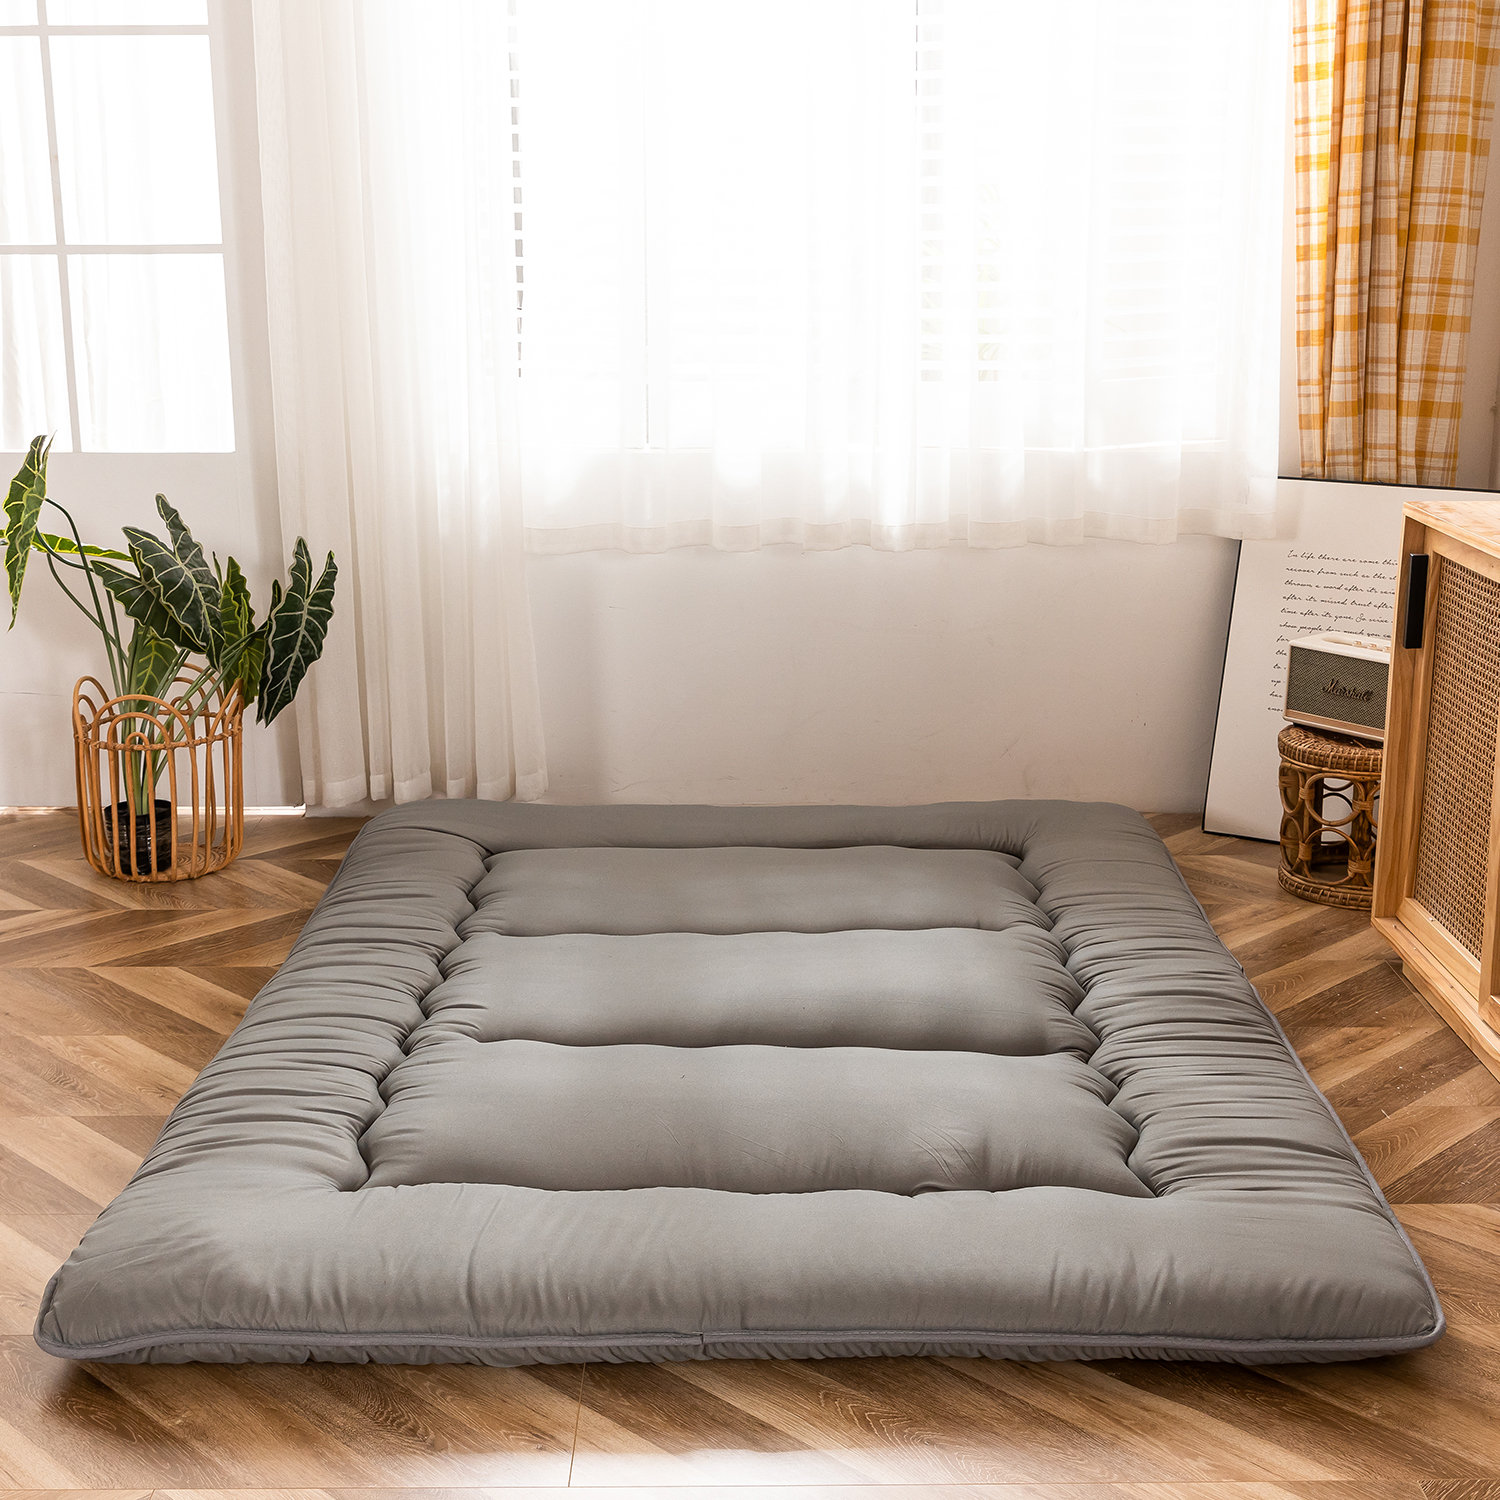 Folding Futon Floor Mattress Floor Mattress Japanese Futon Mattress Thicken Tatami Mat Sleeping Pad Foldable Roll Up Lounger Bed Couches and Sofas Color : Beige, Size : Twin